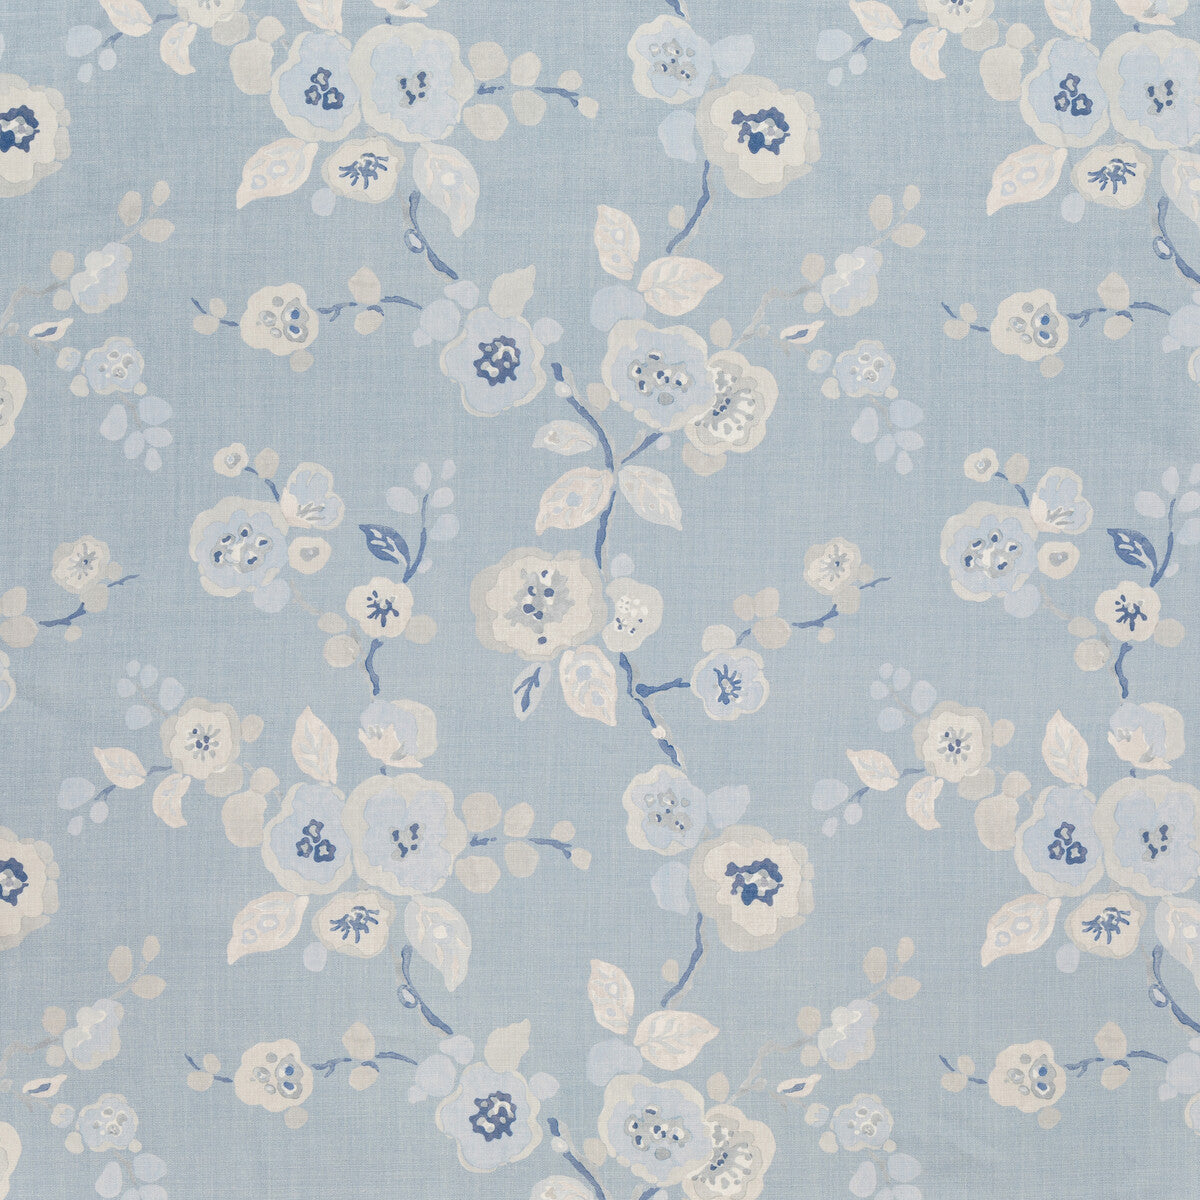 Hana fabric in light blue color - pattern BFC-3705.15.0 - by Lee Jofa in the Blithfield Eden collection